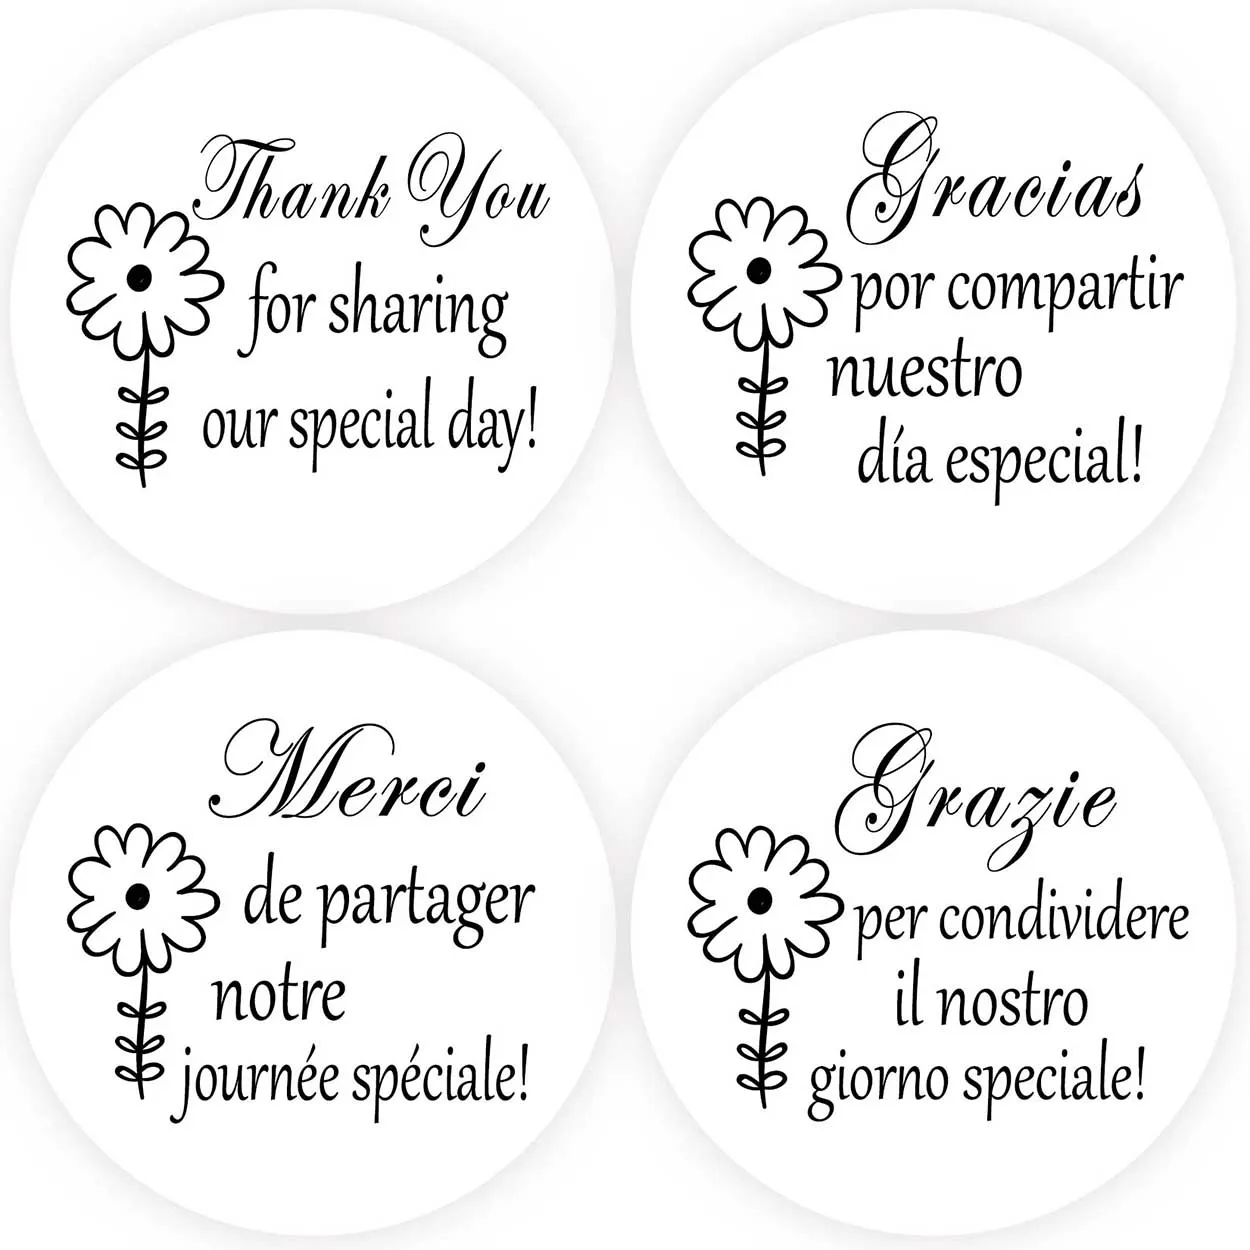 

DouxArt 100 Pieces 40mm Thank You for sharing our special day Stickers Seals, Wedding Party Decoration Communion Baptism Labels